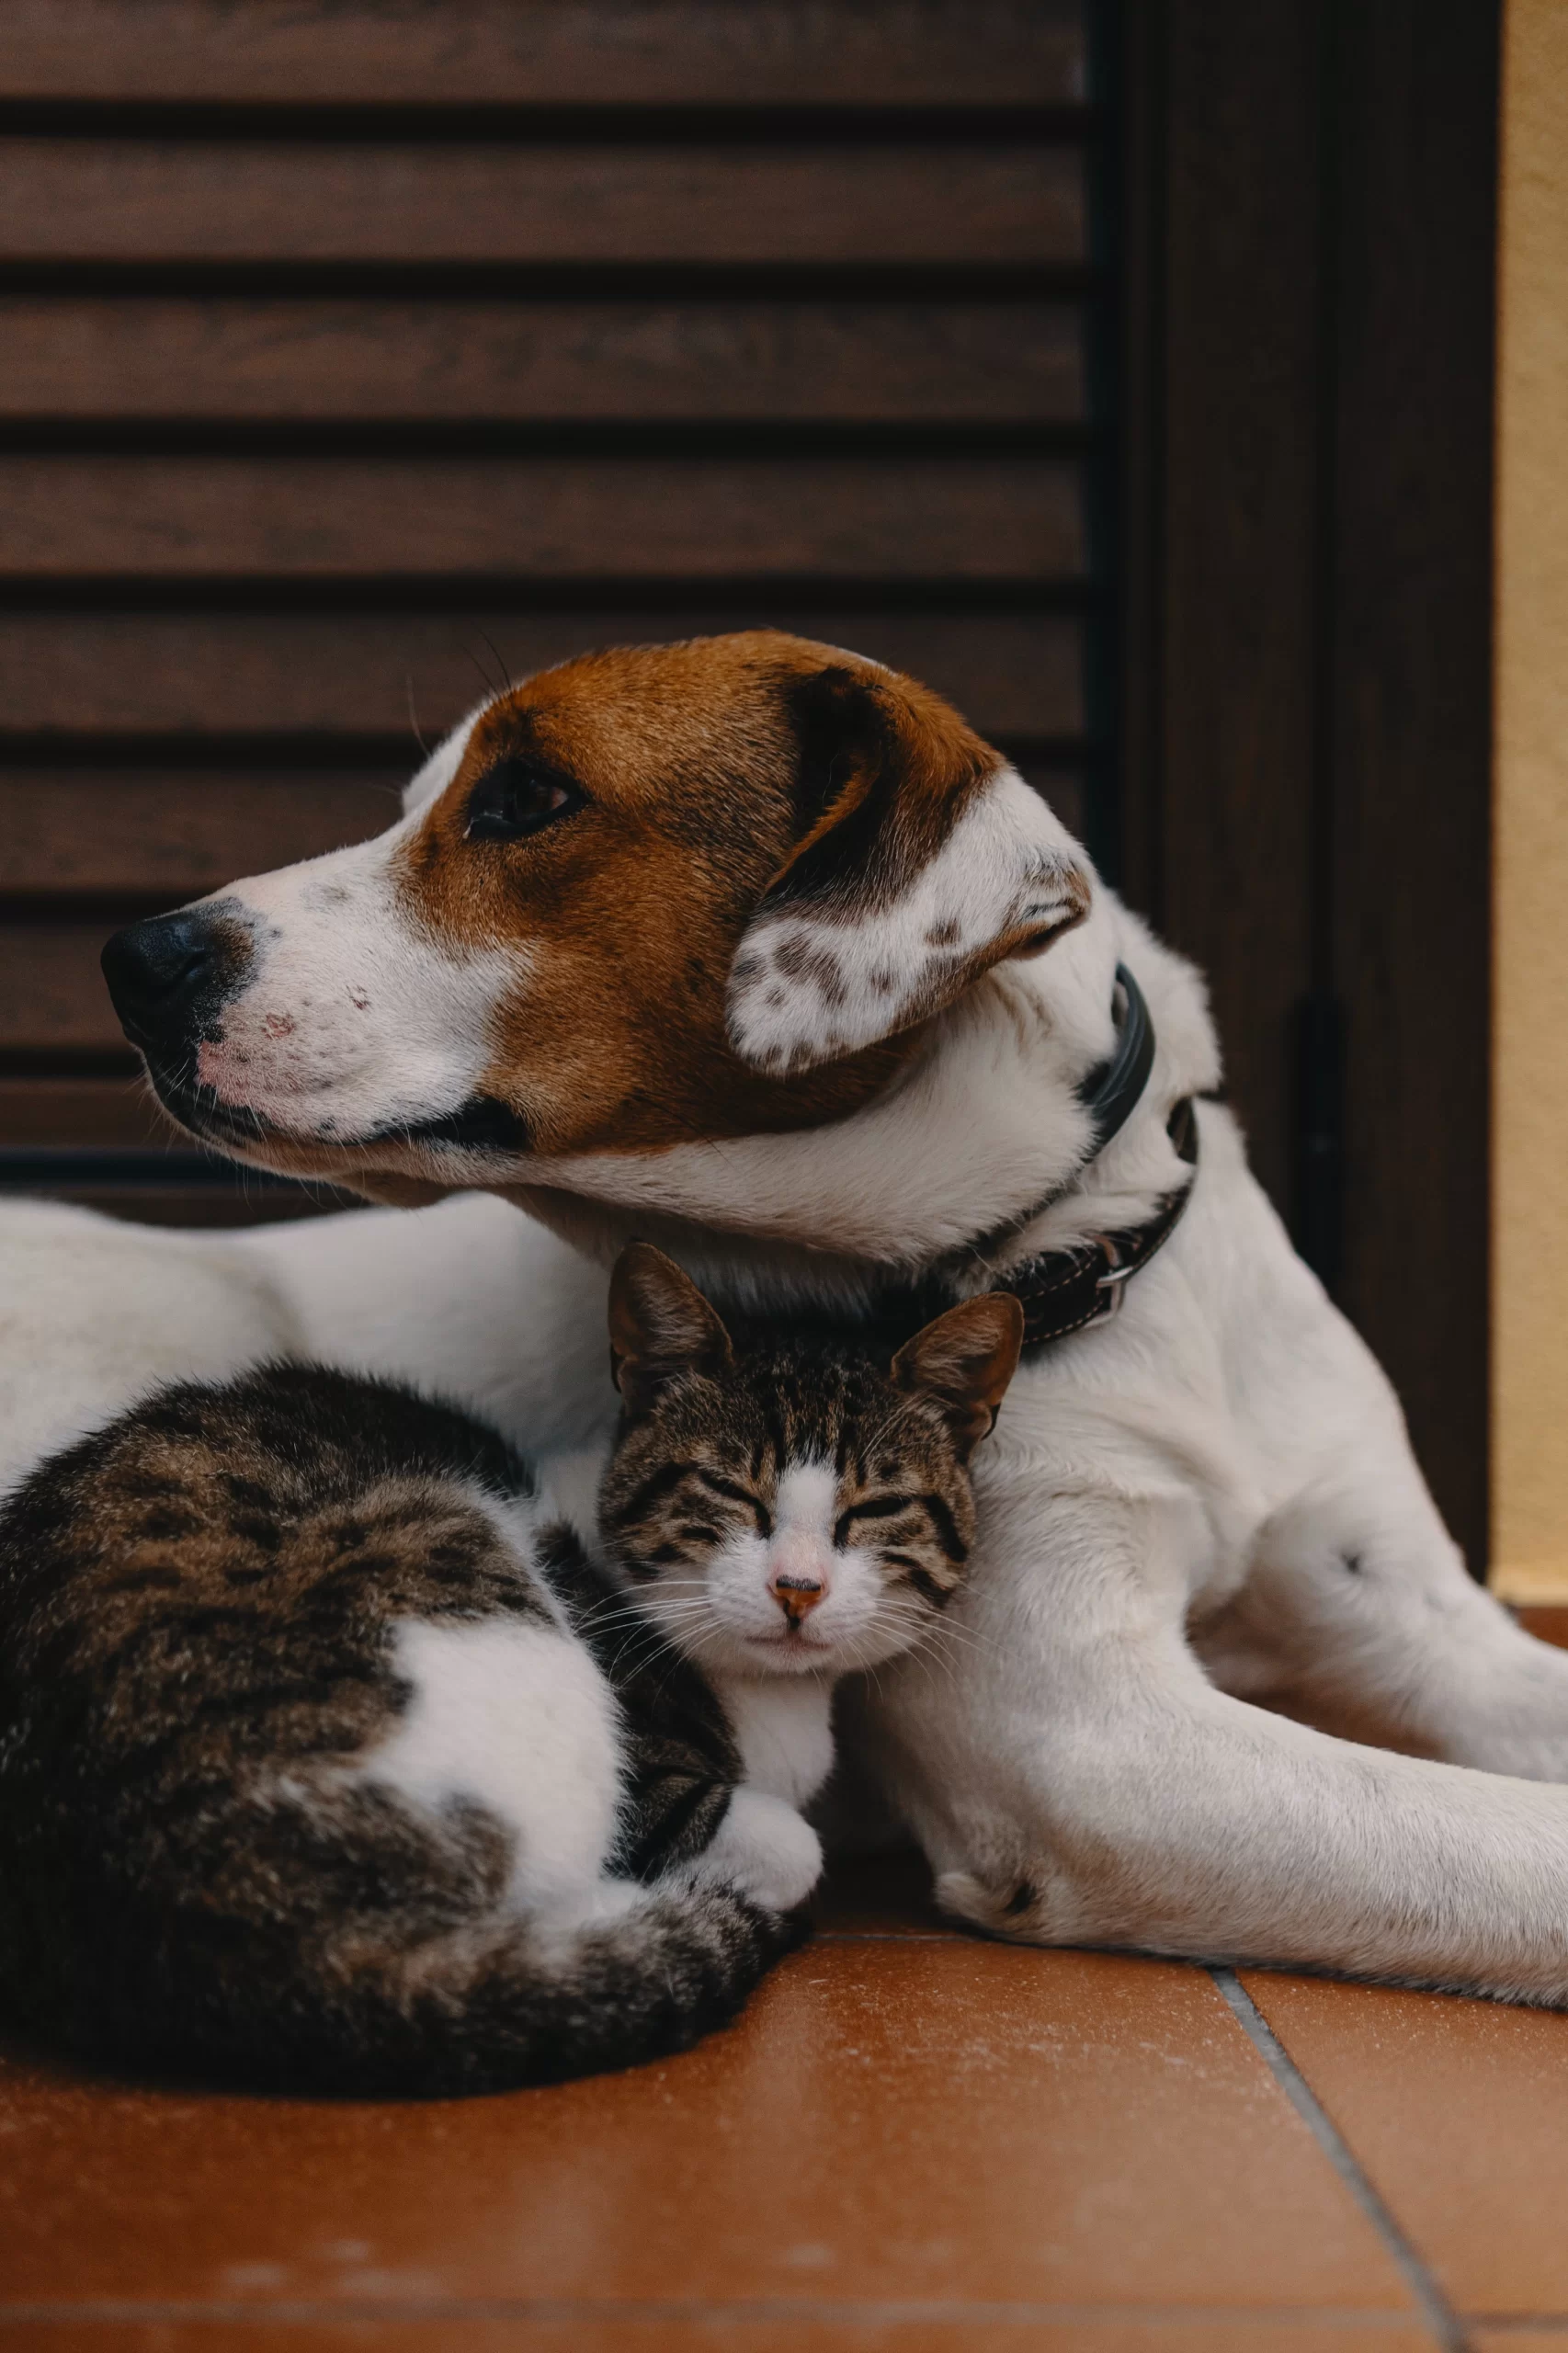 alec-favale-Hound with cat coudled up to him-unsplash